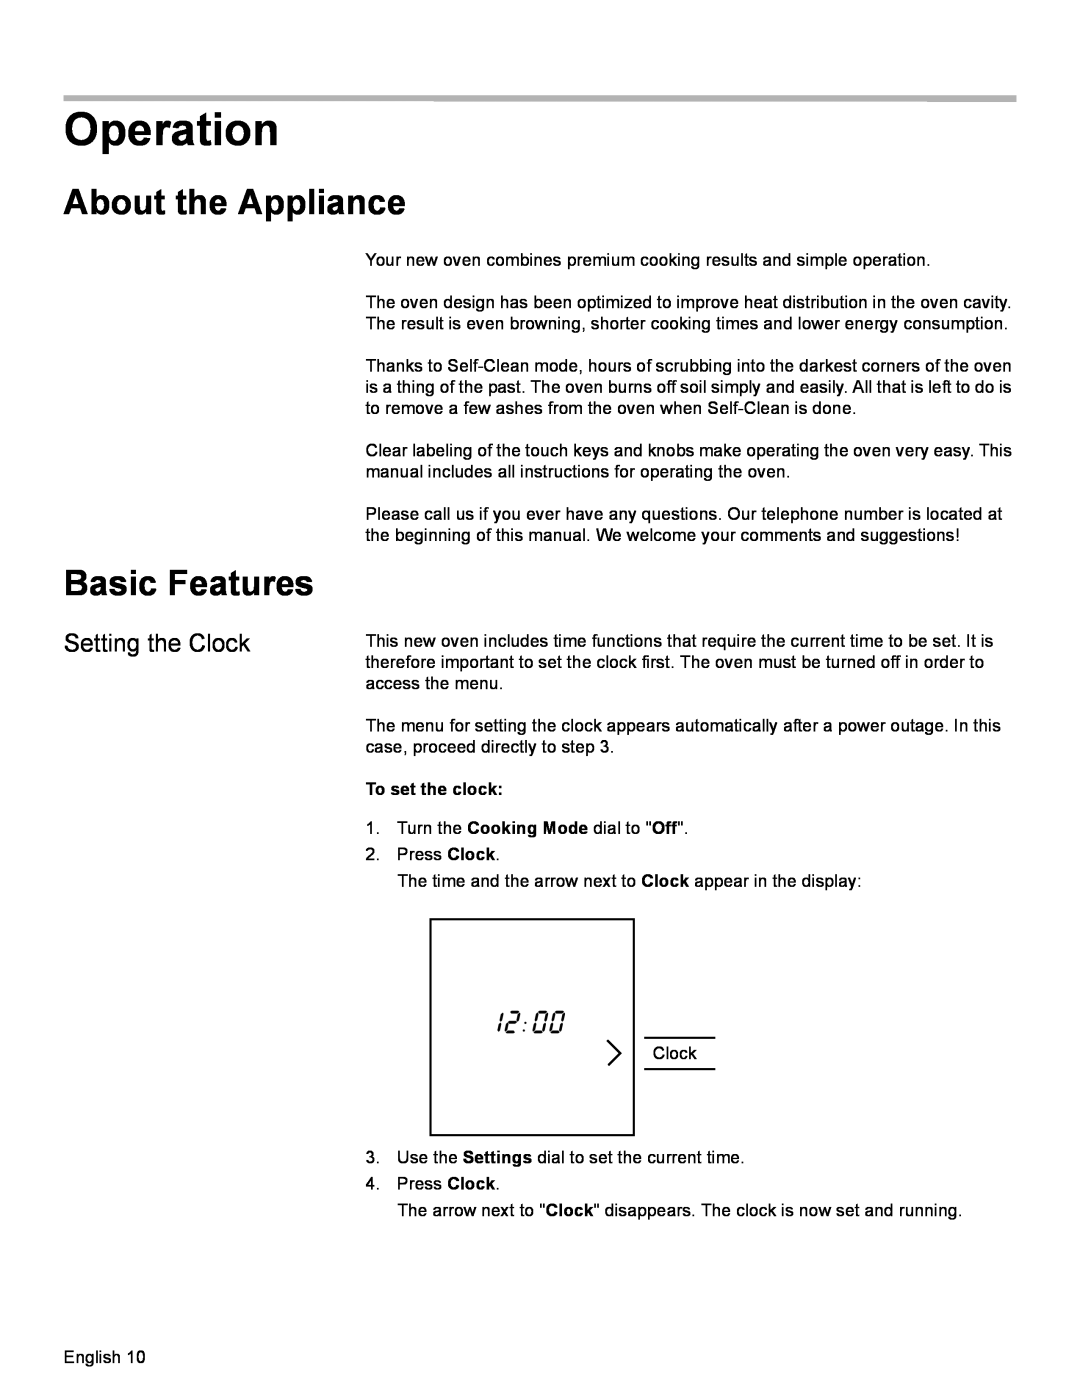 Bosch Appliances HBL35, HBN34, HBN35 manual Operation, About the Appliance, Basic Features 